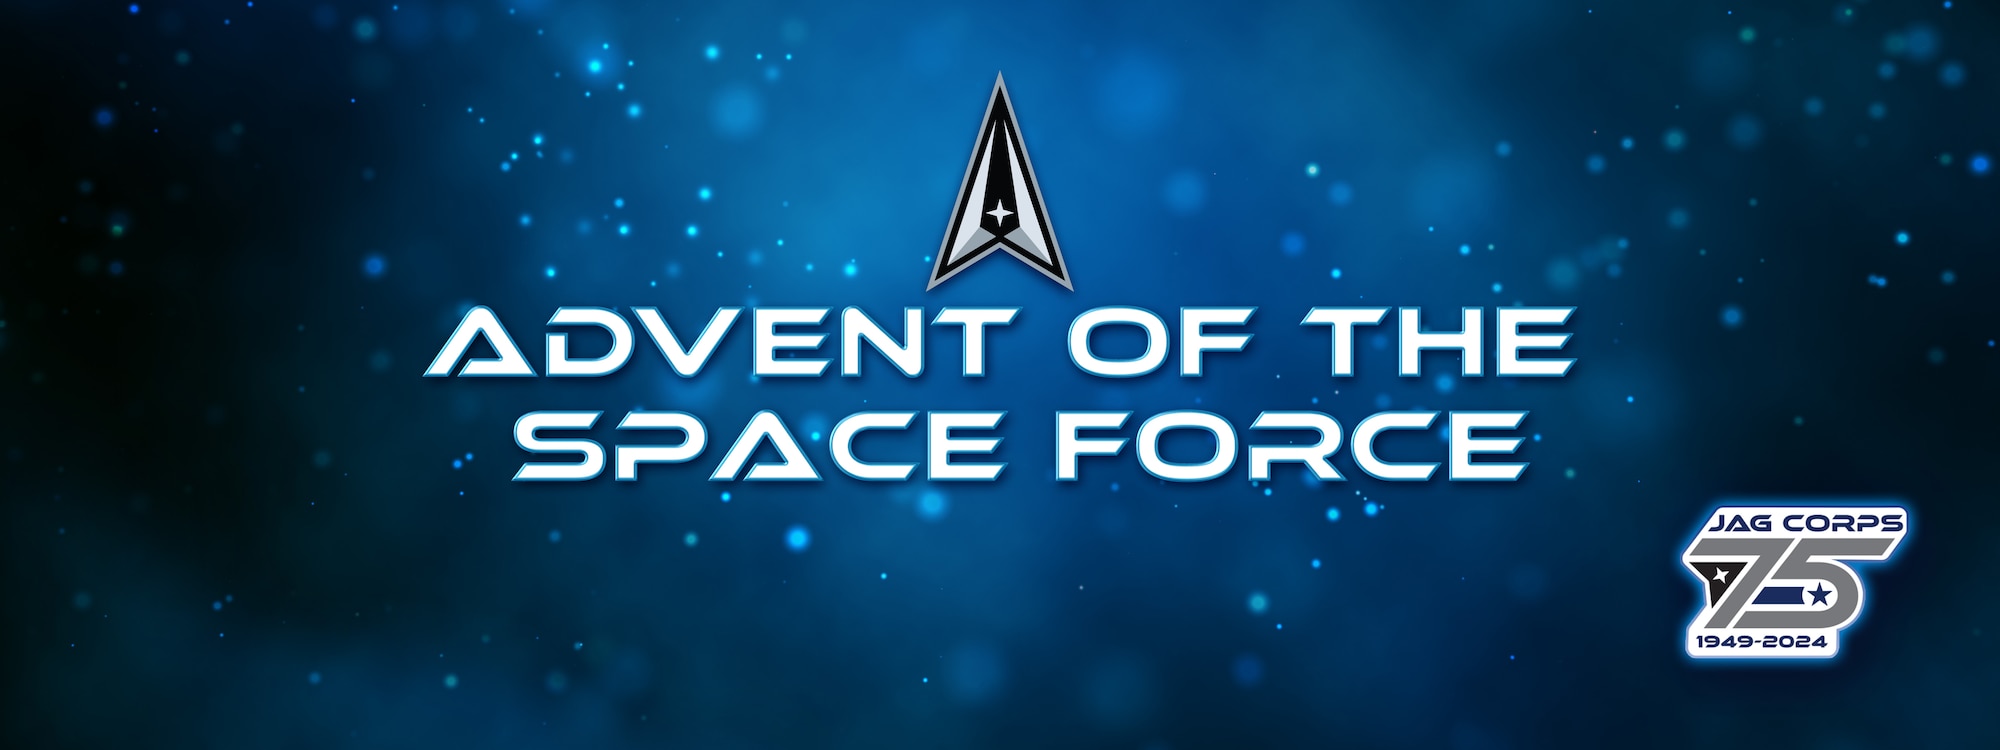 Advent of the Space Force. Modified Illustration: © k_e_n /stock.adobe.com [image is not public domain]